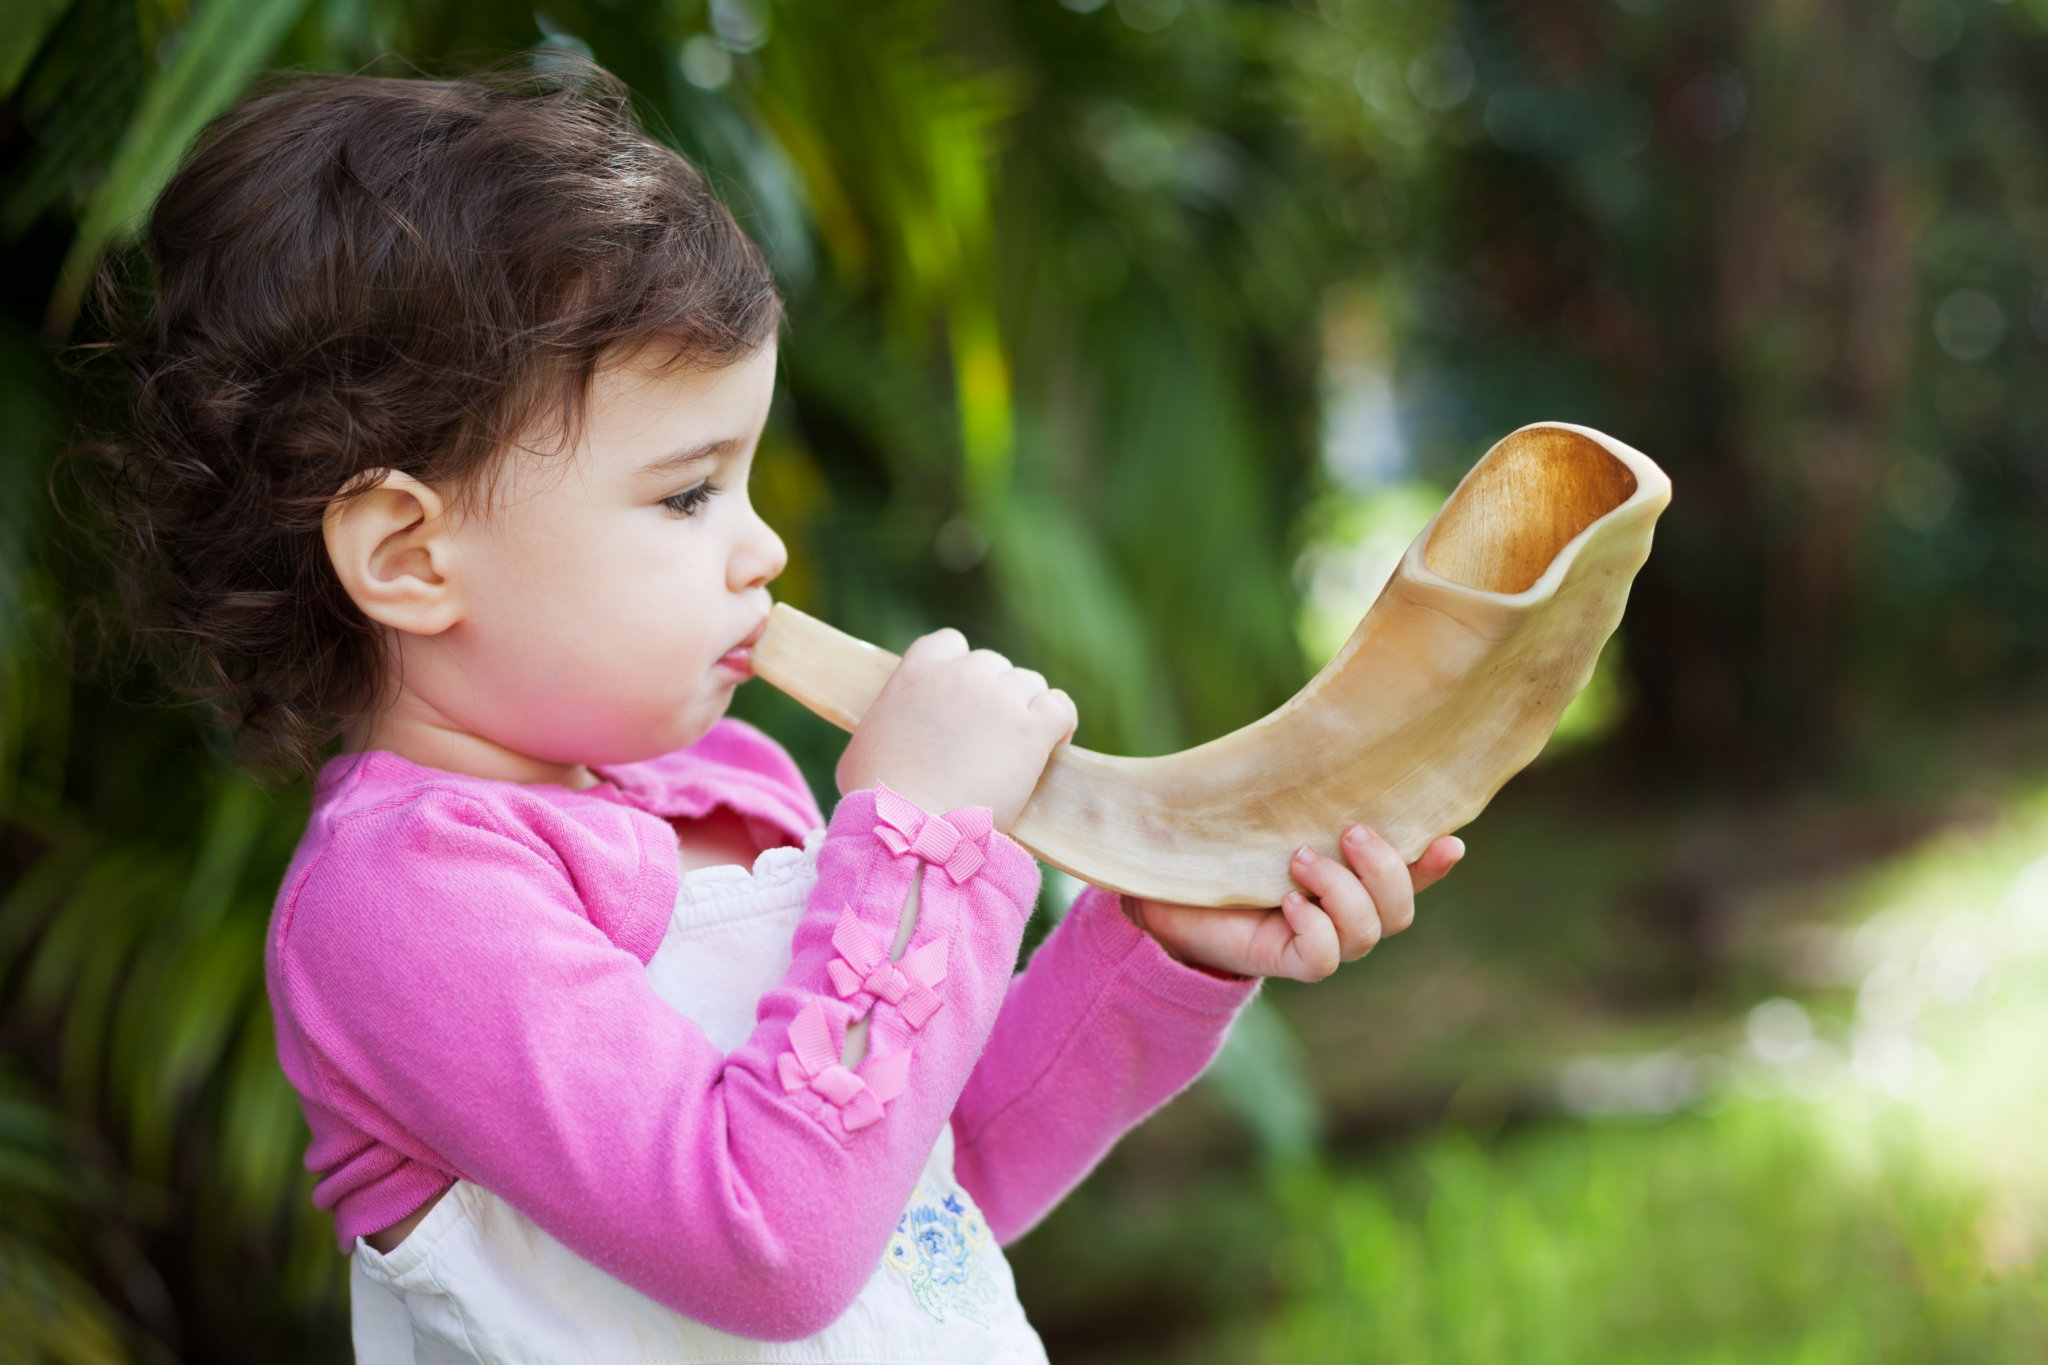 The shofar is a beautiful ram’s horn that is blown every year during Rosh Hashanah and Yom Kippur. The call of the shofar is a symbolic battle cry of the Jewish people and represents a reminder of Tzedakah (giving help to those in need) and the covenant between us and God. When we blow the shofar, we trust in God’s plan for us and know that his instructions are our path to a fulfilling and meaningful life in the new year. It is sounded 100 times during the High Holy Days. And a long and loud shofar blast marks the end of the fast day of Yom Kippur.